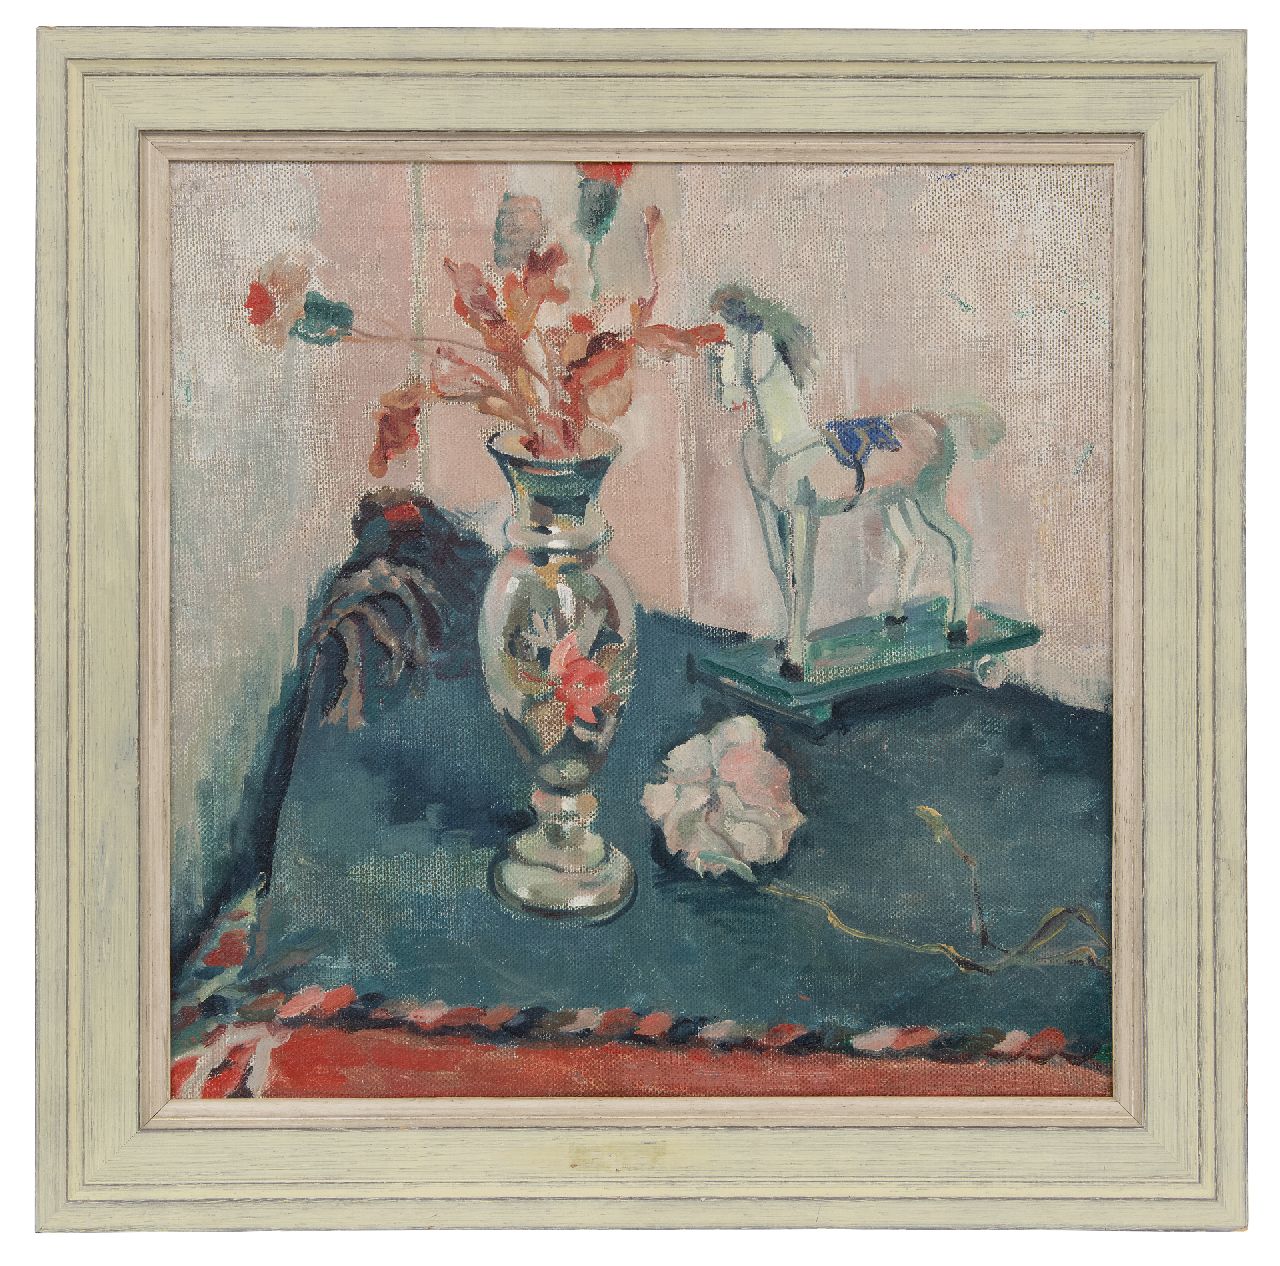 Martens G.G.  | Gijsbert 'George' Martens | Paintings offered for sale | Still life with flowers and toy horse, oil on canvas 50.5 x 50.3 cm